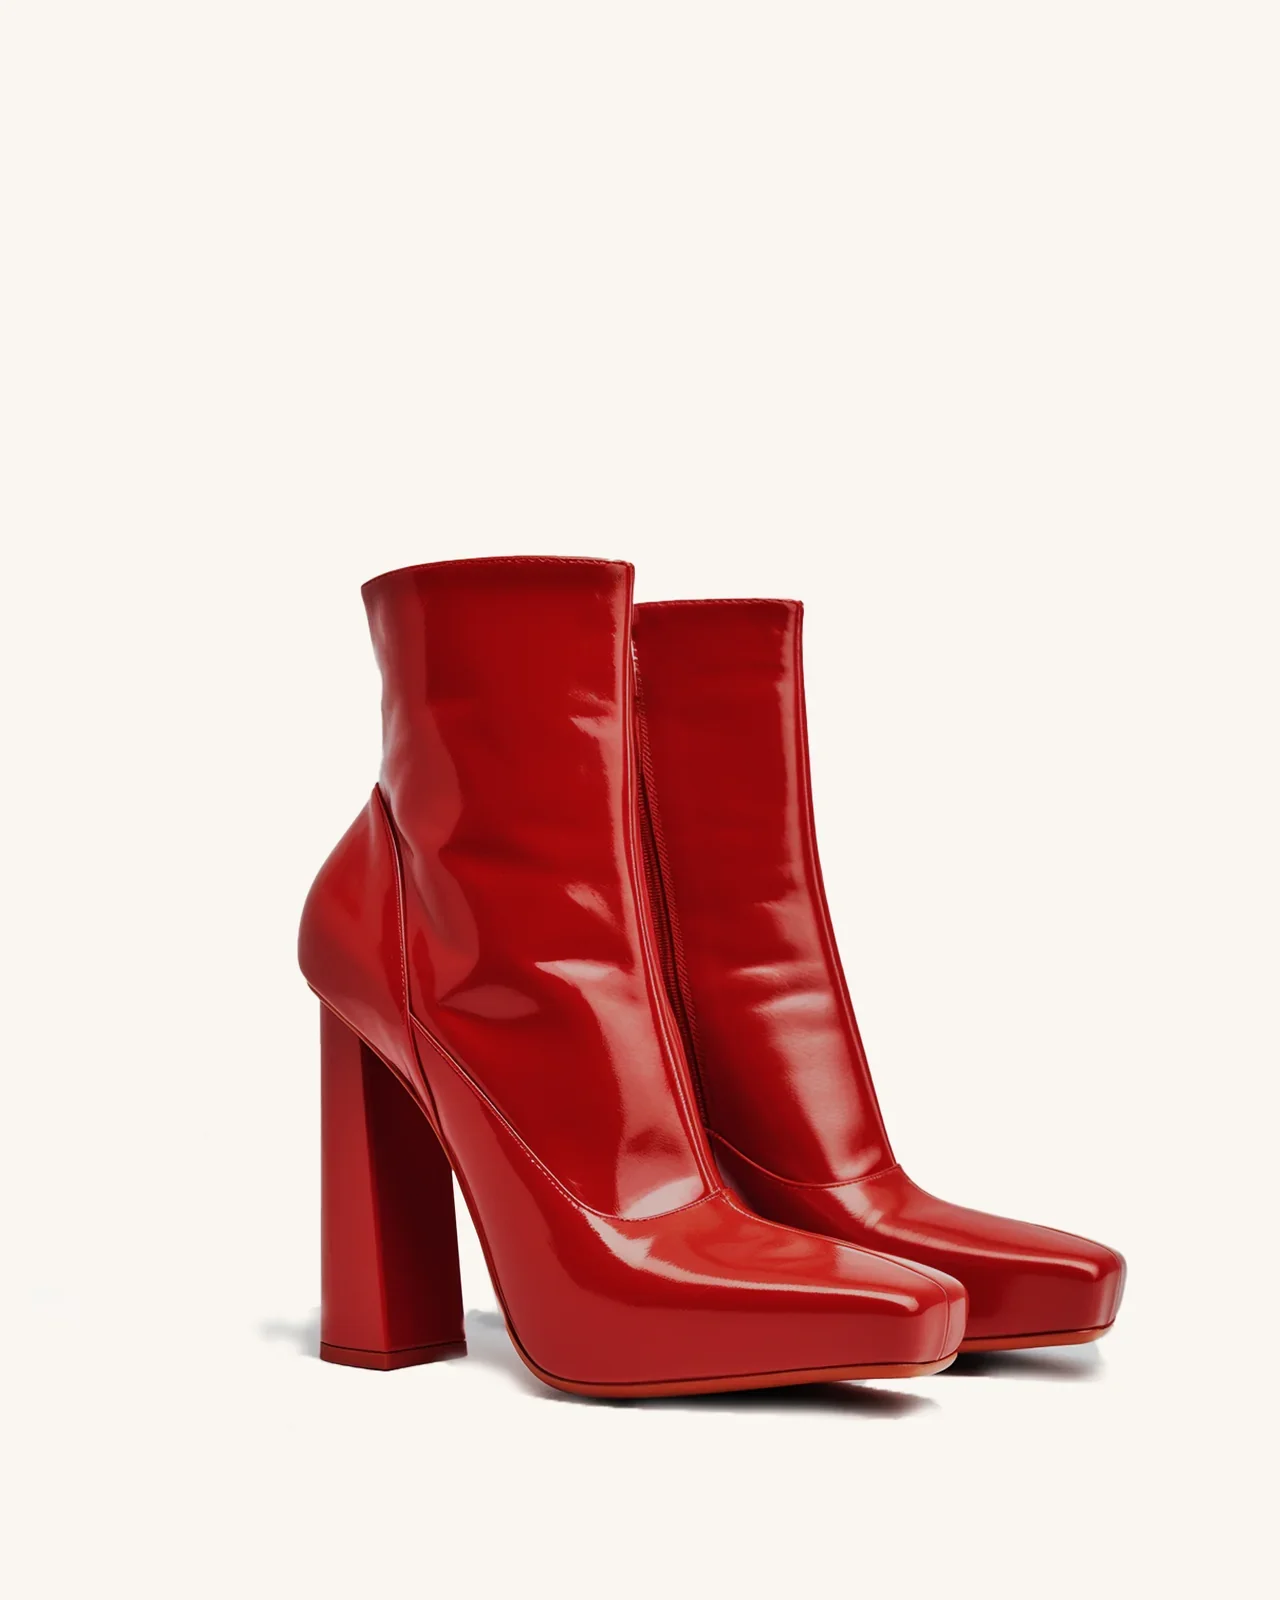 Kaylee Cone Heel Ankle Boot Shoes in Kaylee Cone Heel Ankle Boot - Get  great deals at JustFab